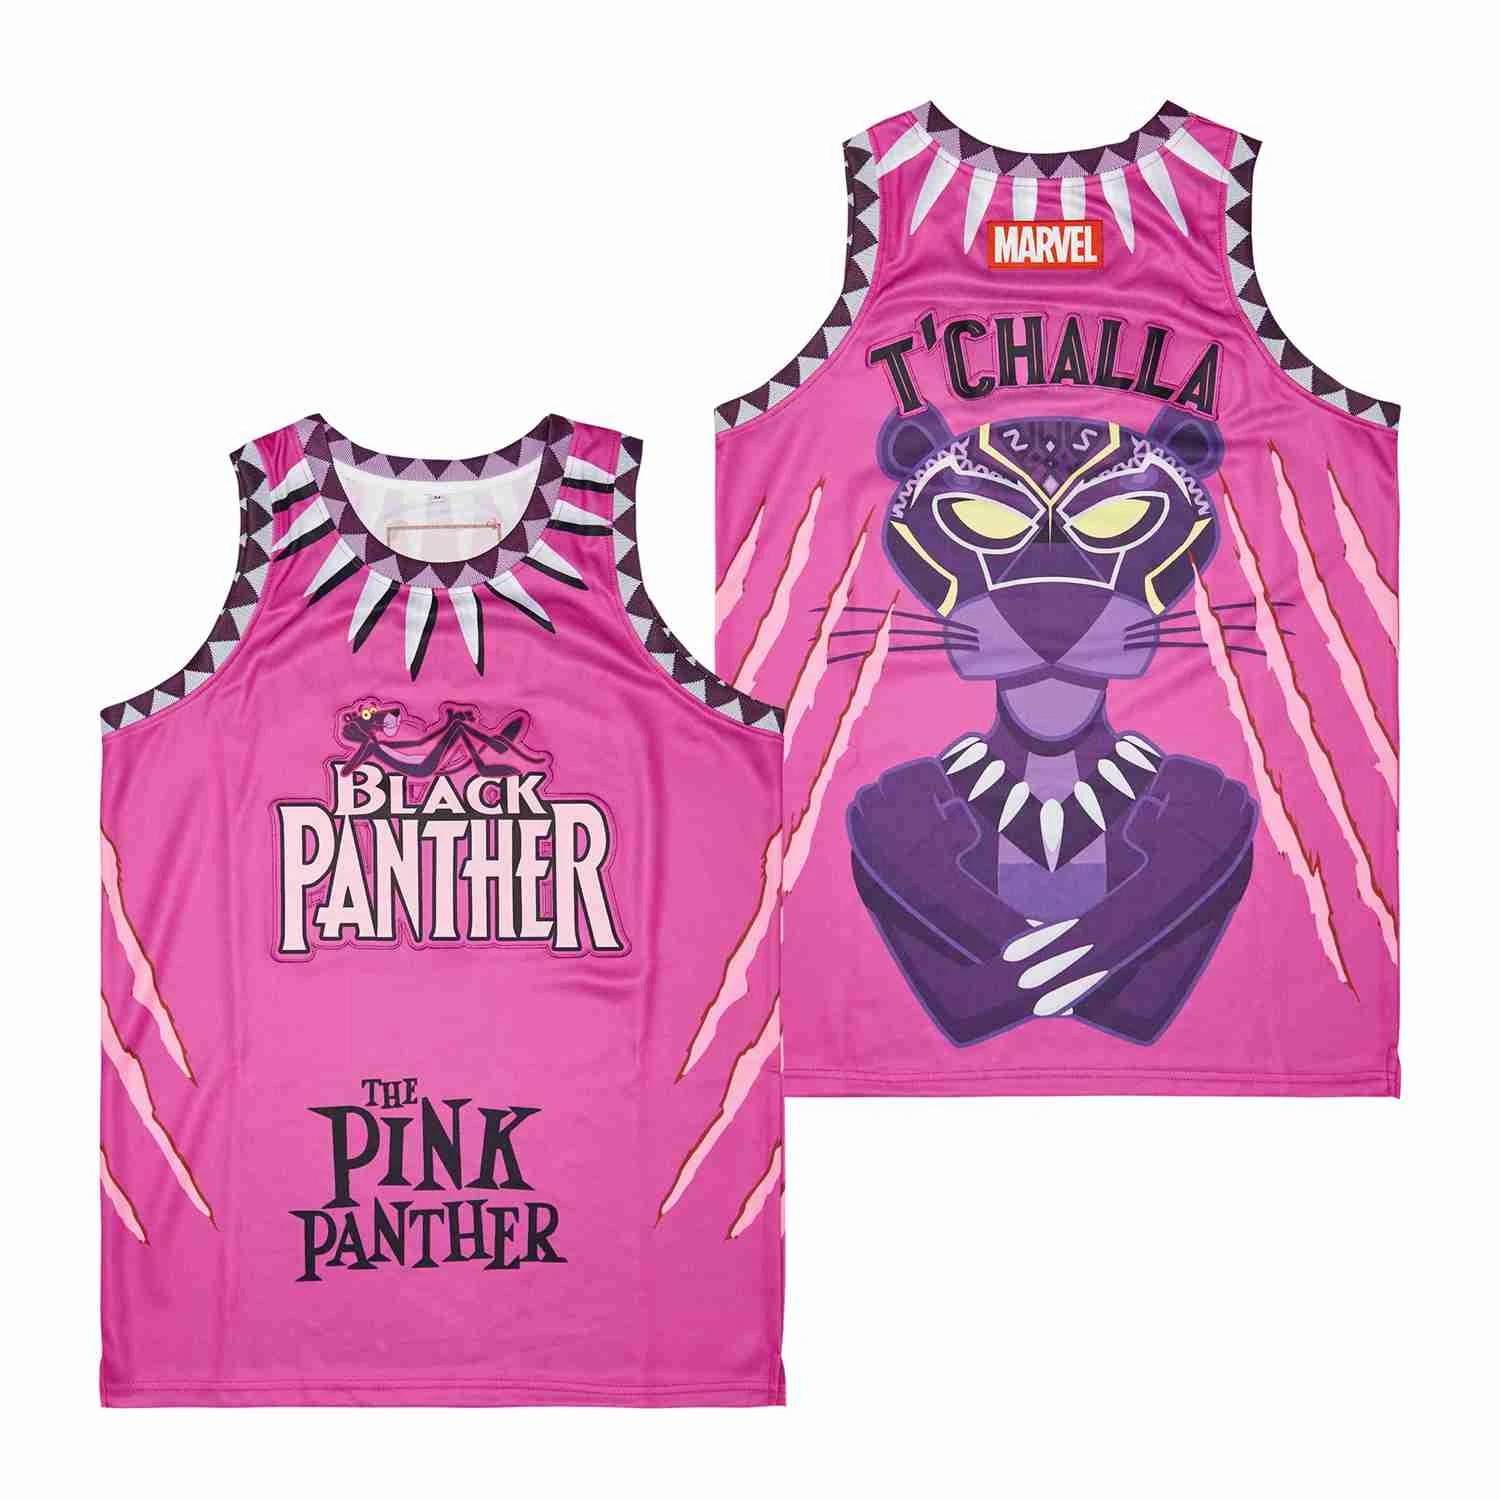 

BG Basketball Jersey 3 T'CHALLA Pink Black Panther Jerseys Embroidery Sewing Outdoor Sportswear Hip-hop Culture 2022 Summer